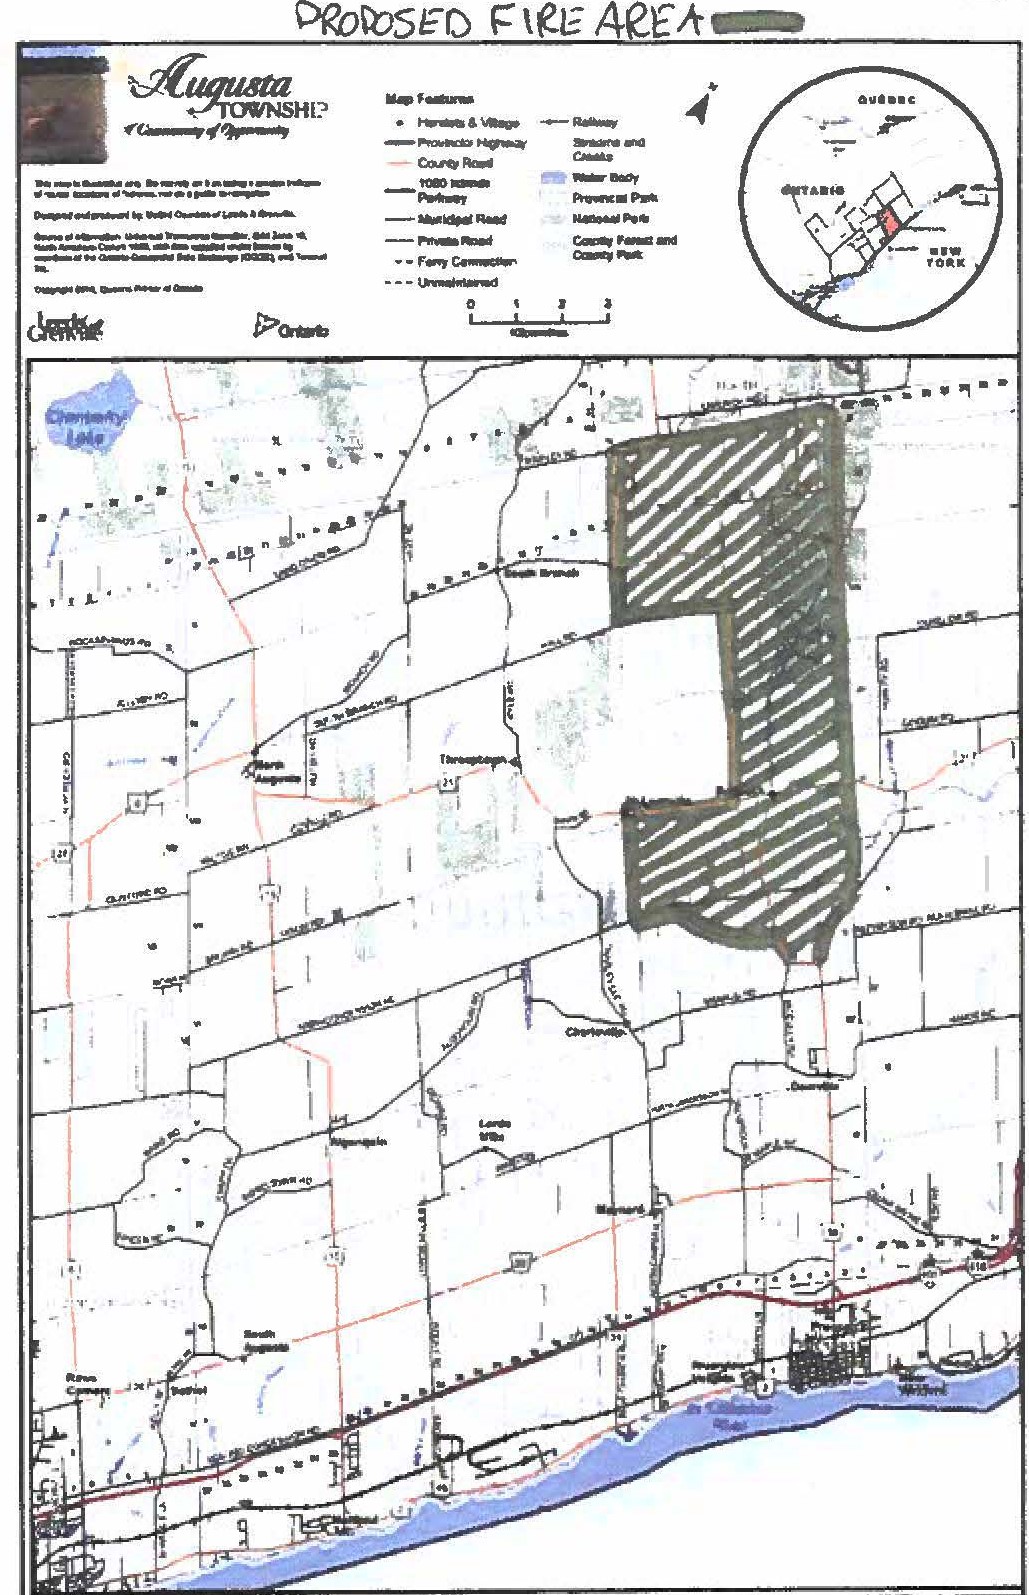 Map of Augusta with the proposed fire area marked.